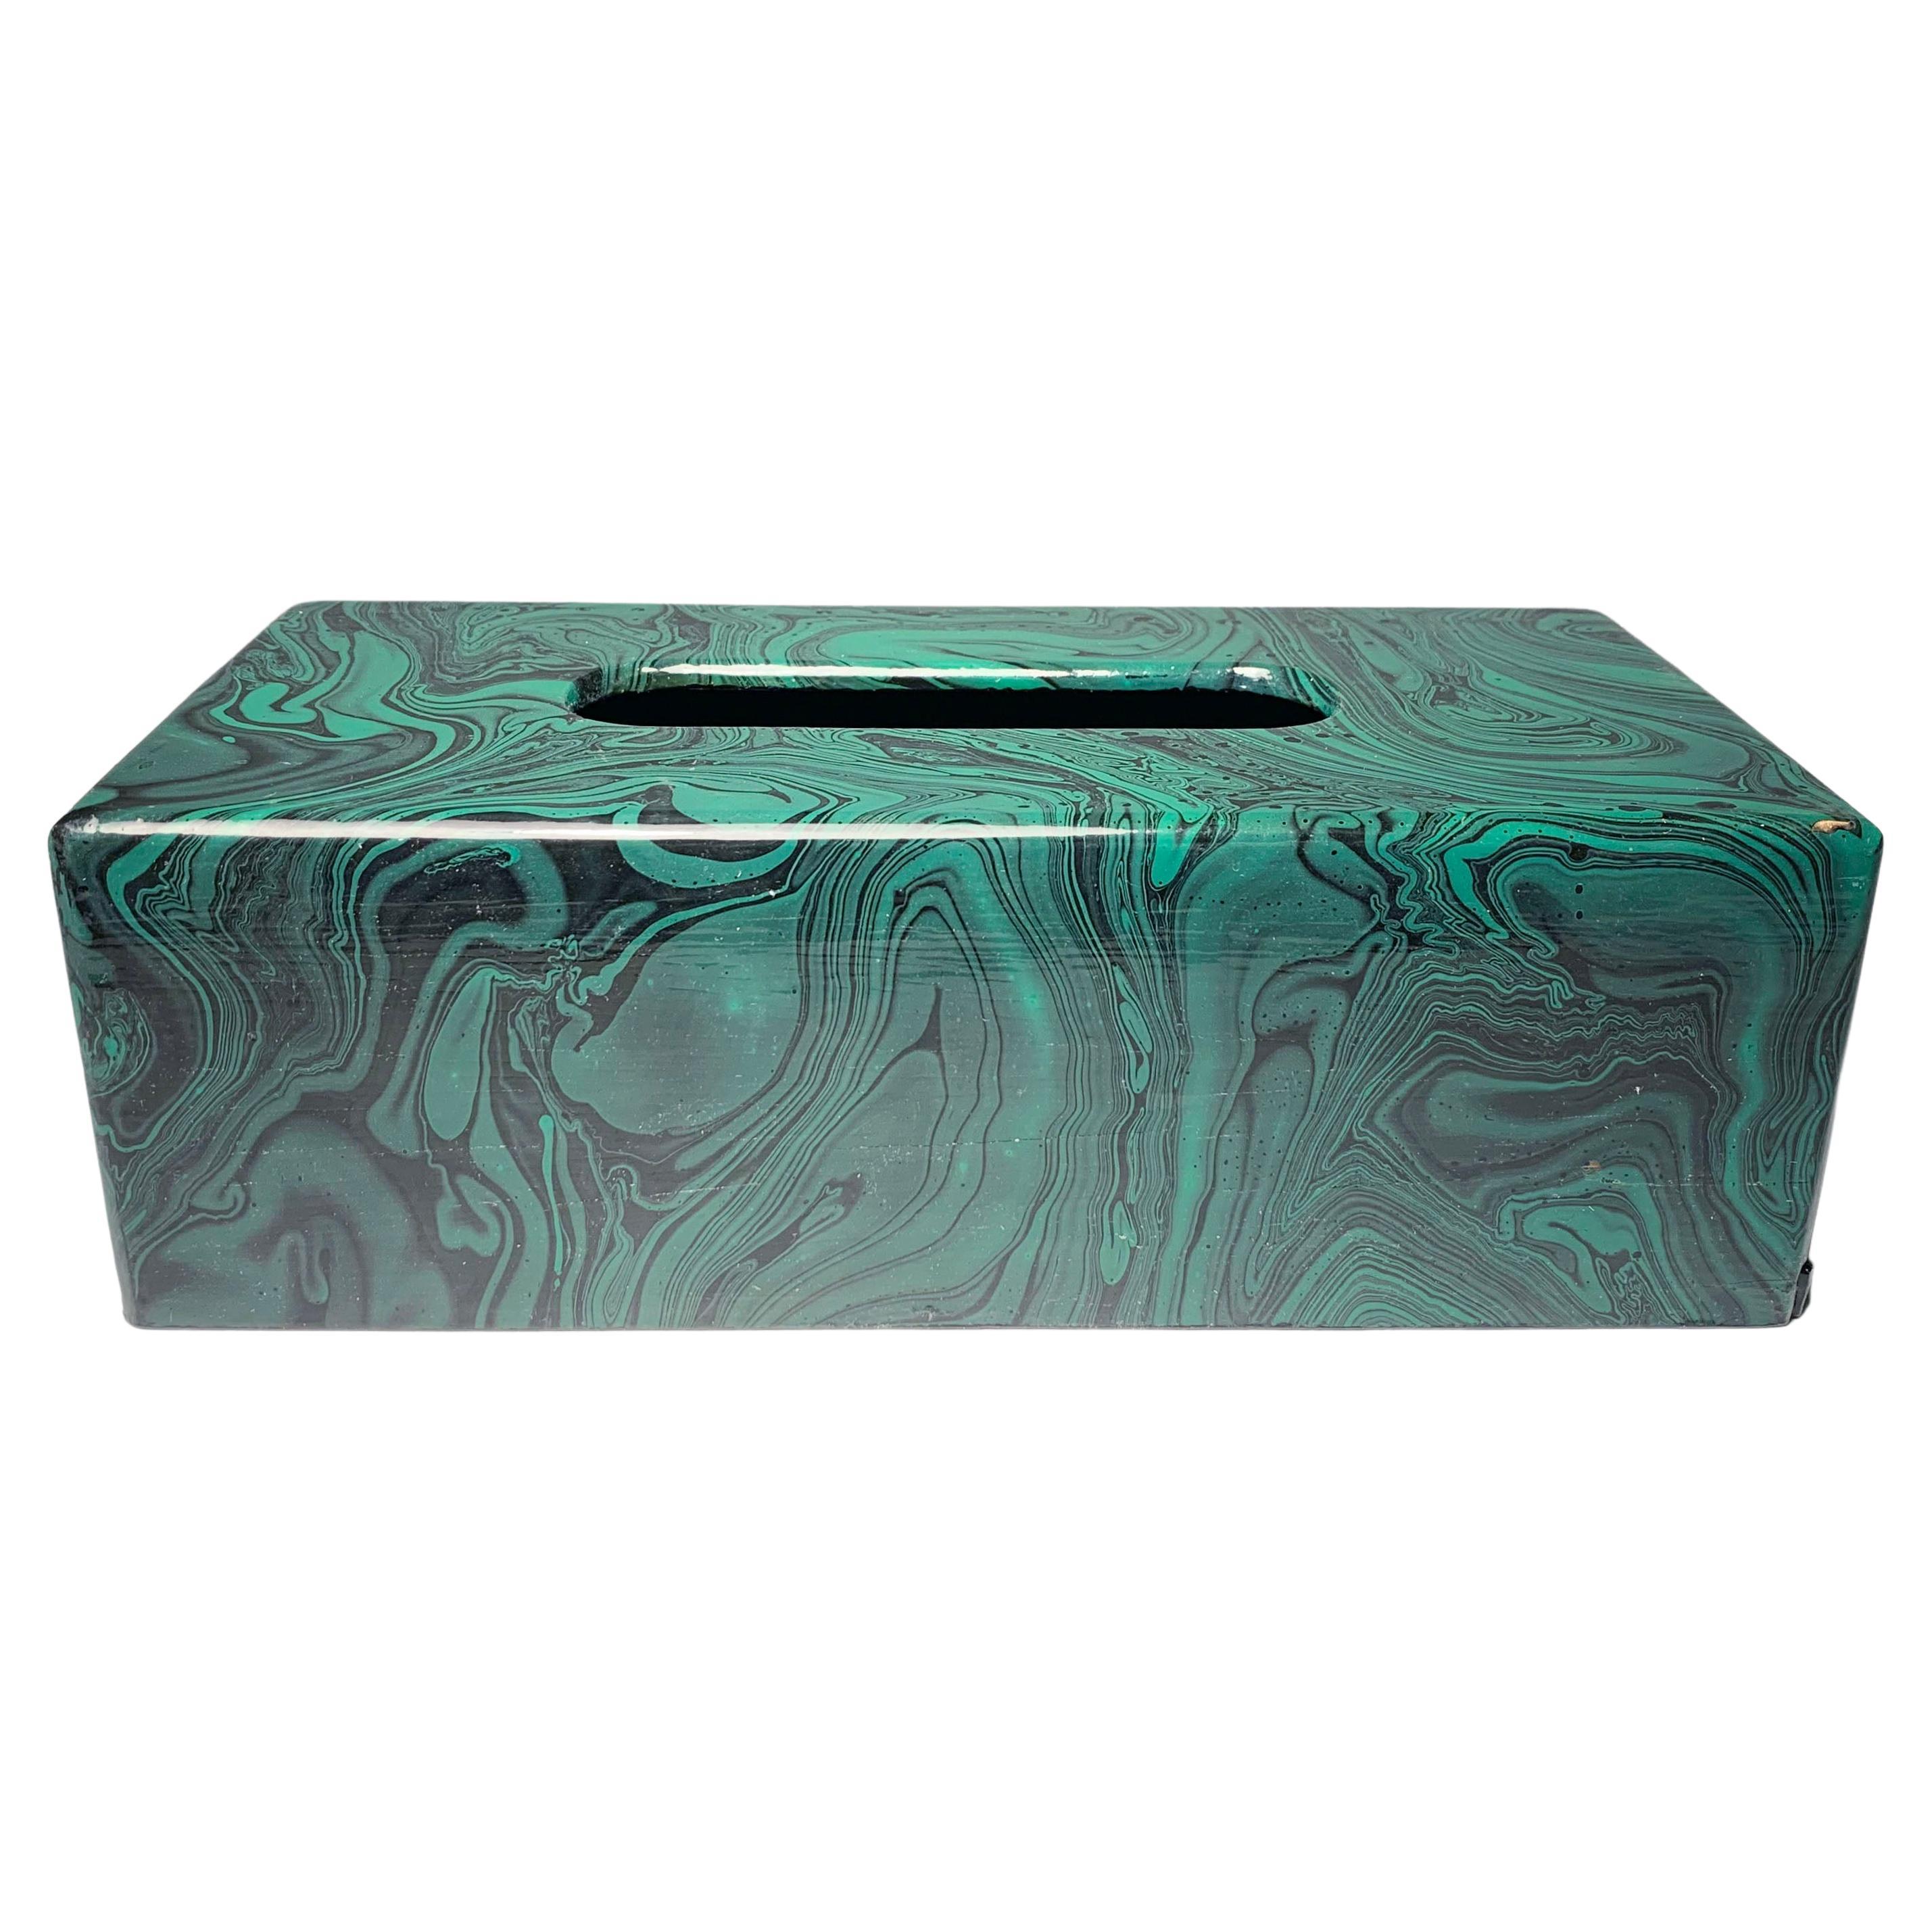 Vintage Handcrafted/Painted Faux Malachite Tissue Box